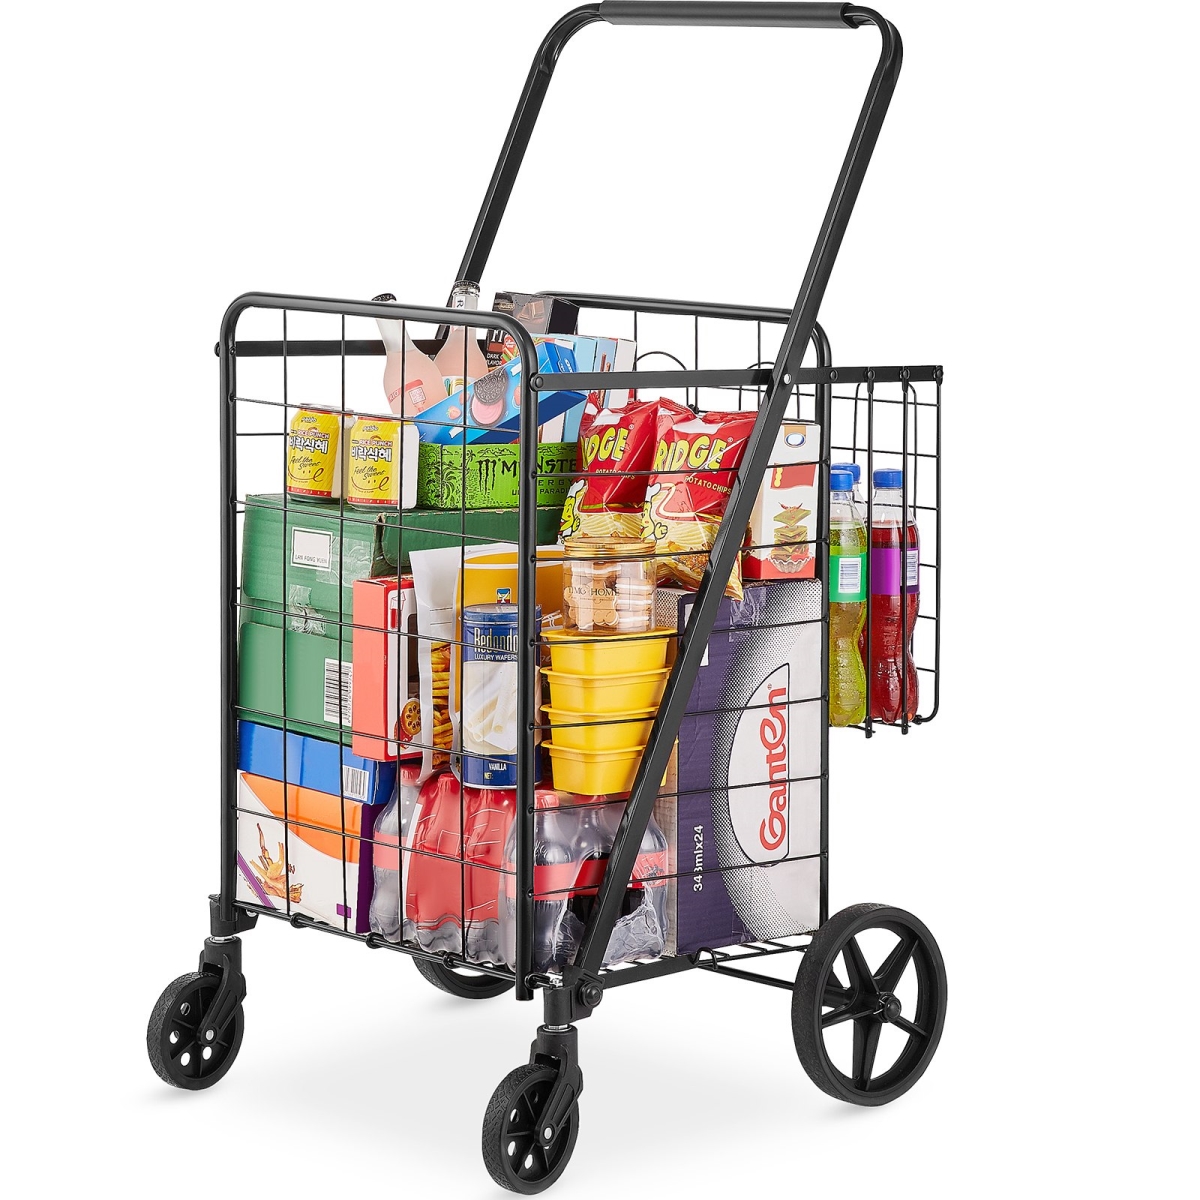 Picture of Vevor XYCZDSTJ10688G1QGV0 110 lbs Folding Shopping Cart with Double Baskets